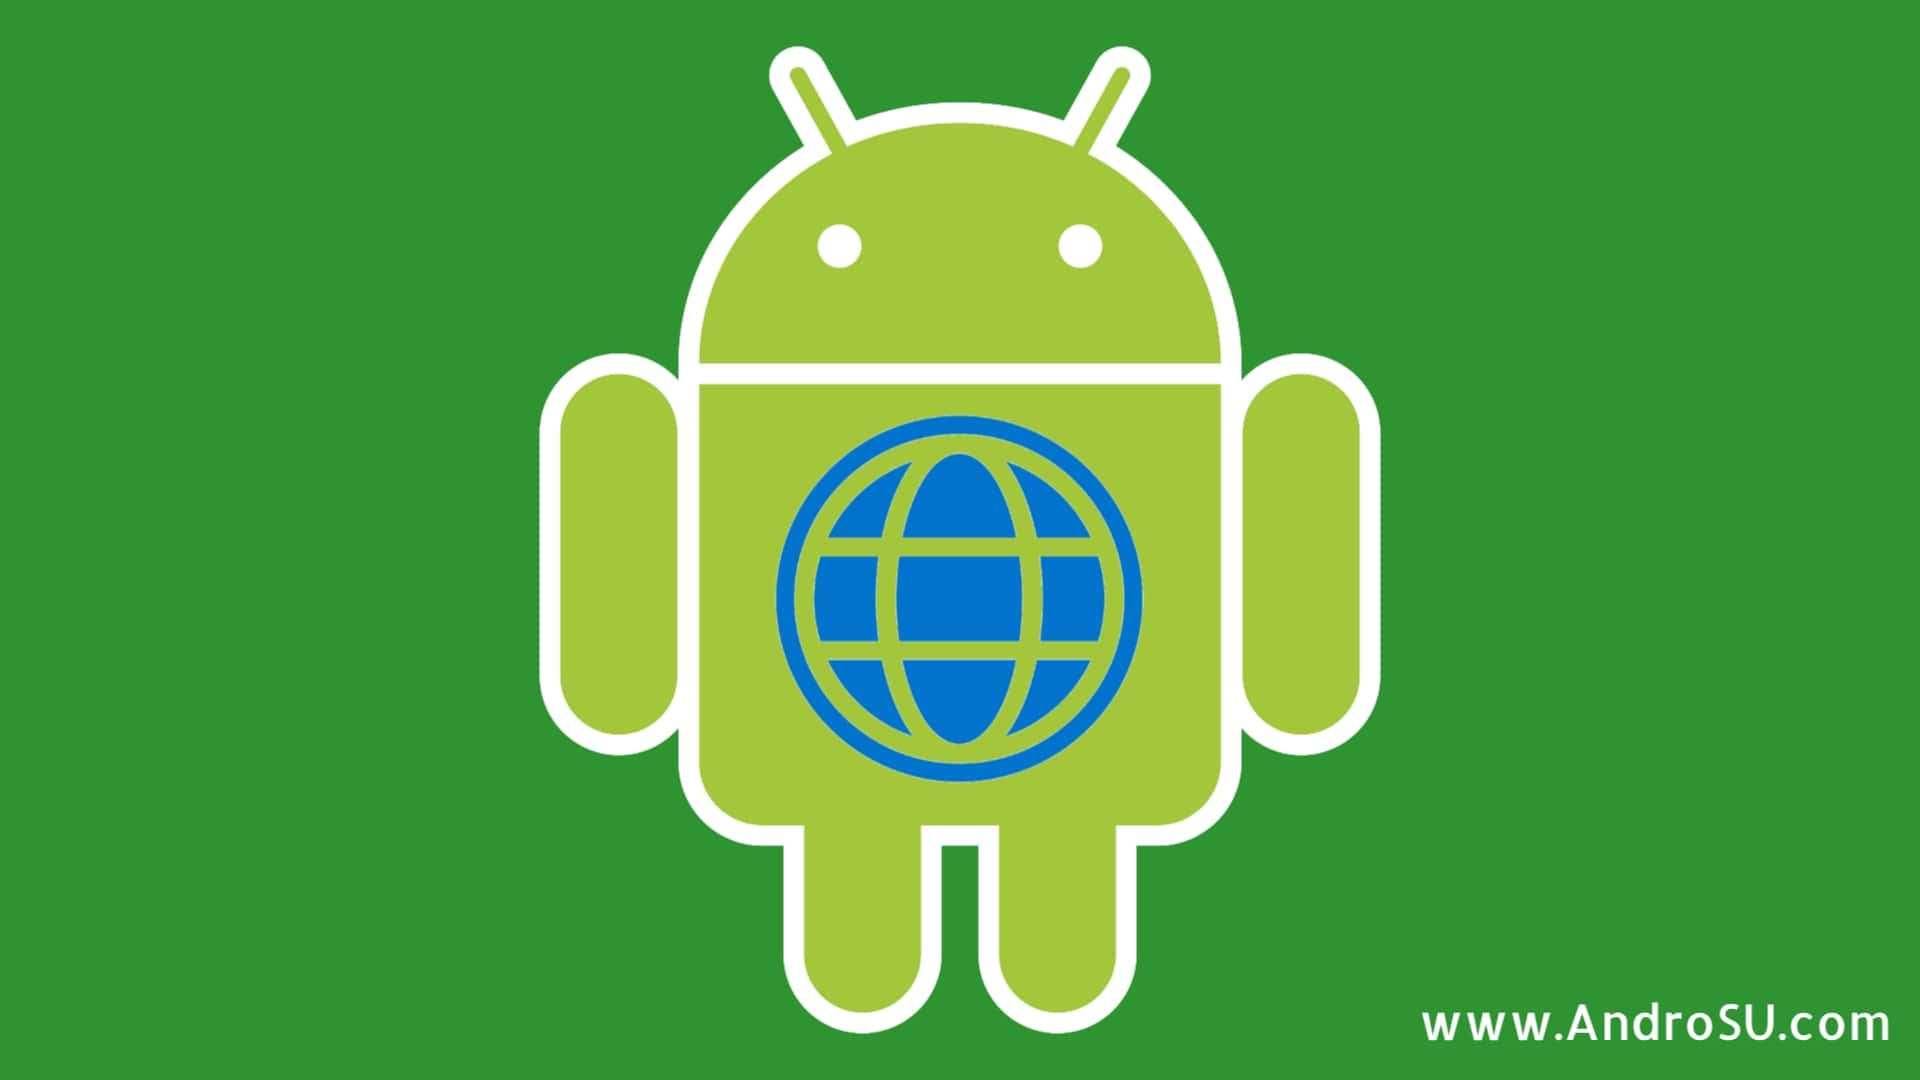 How to Build a Website using Android Device